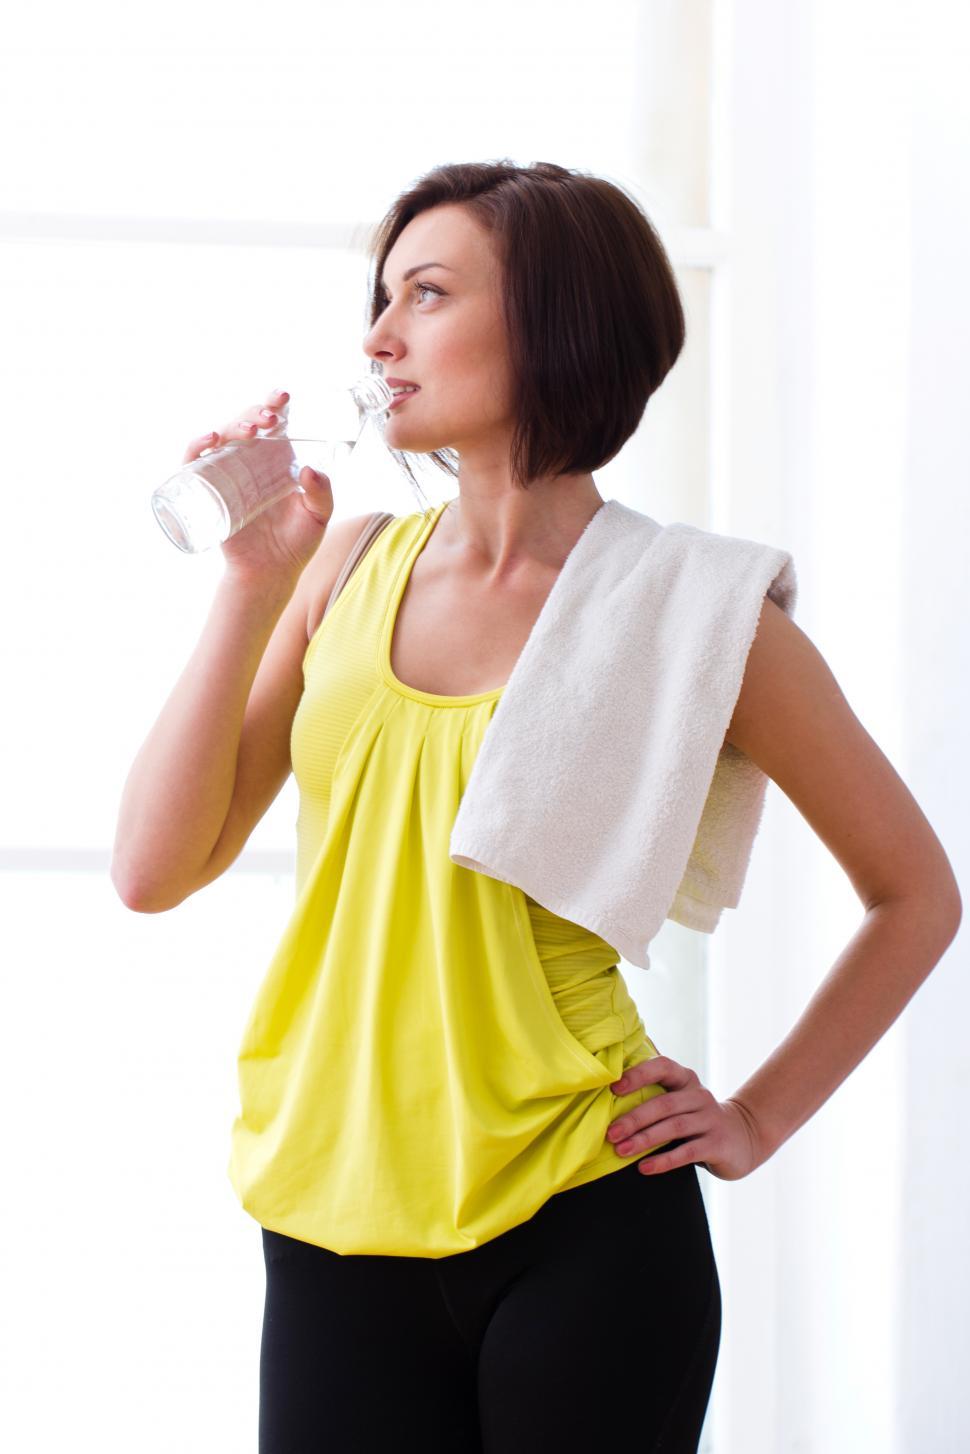 Free Image of Woman drinking water after fitness workout 